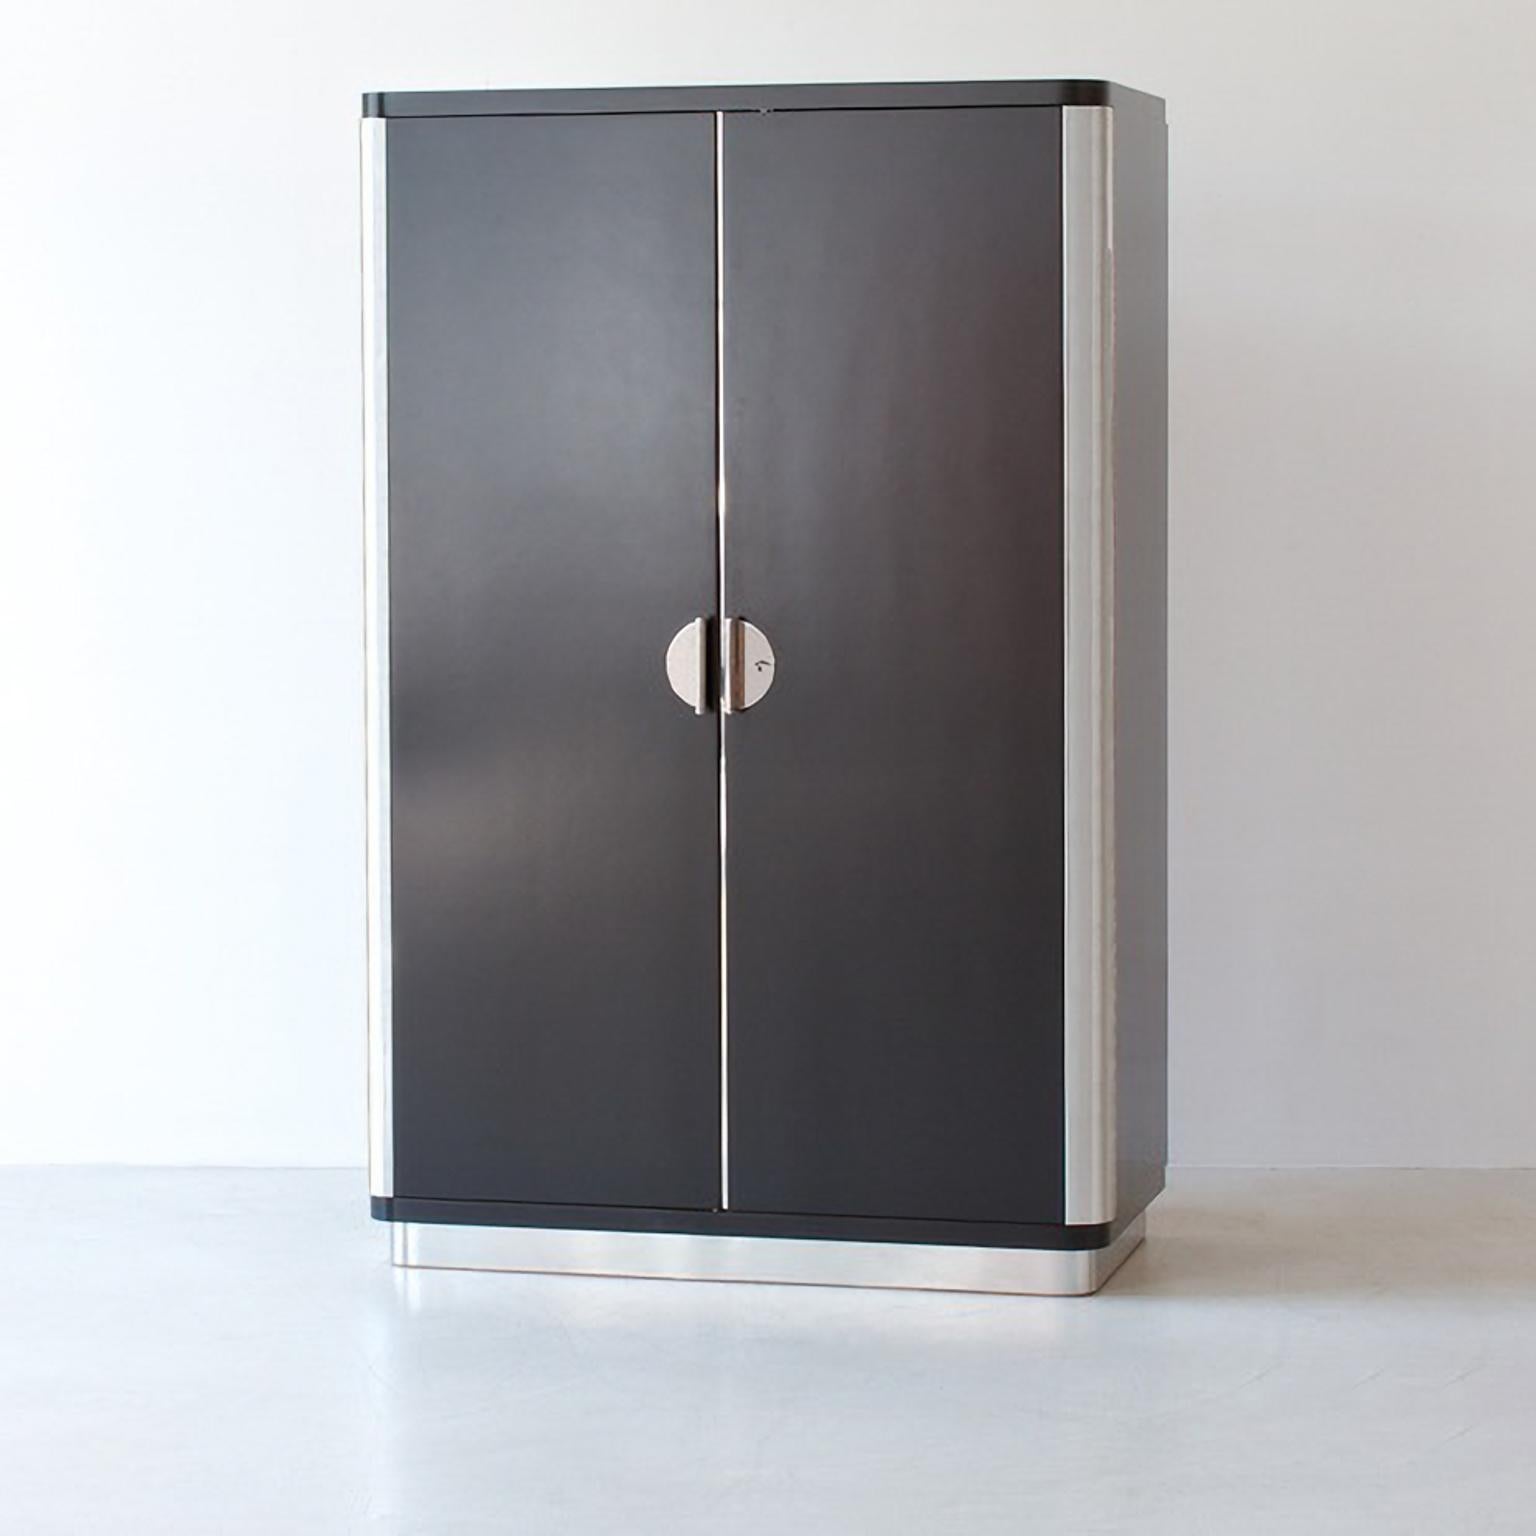 Custom made three-door wardrobe / armoire, designed and manufactured by GMD Berlin, exclusively presented in our Rudolf Vichr Collection.

These high-quality, handmade furniture in a classic, timeless design is made from selected materials according